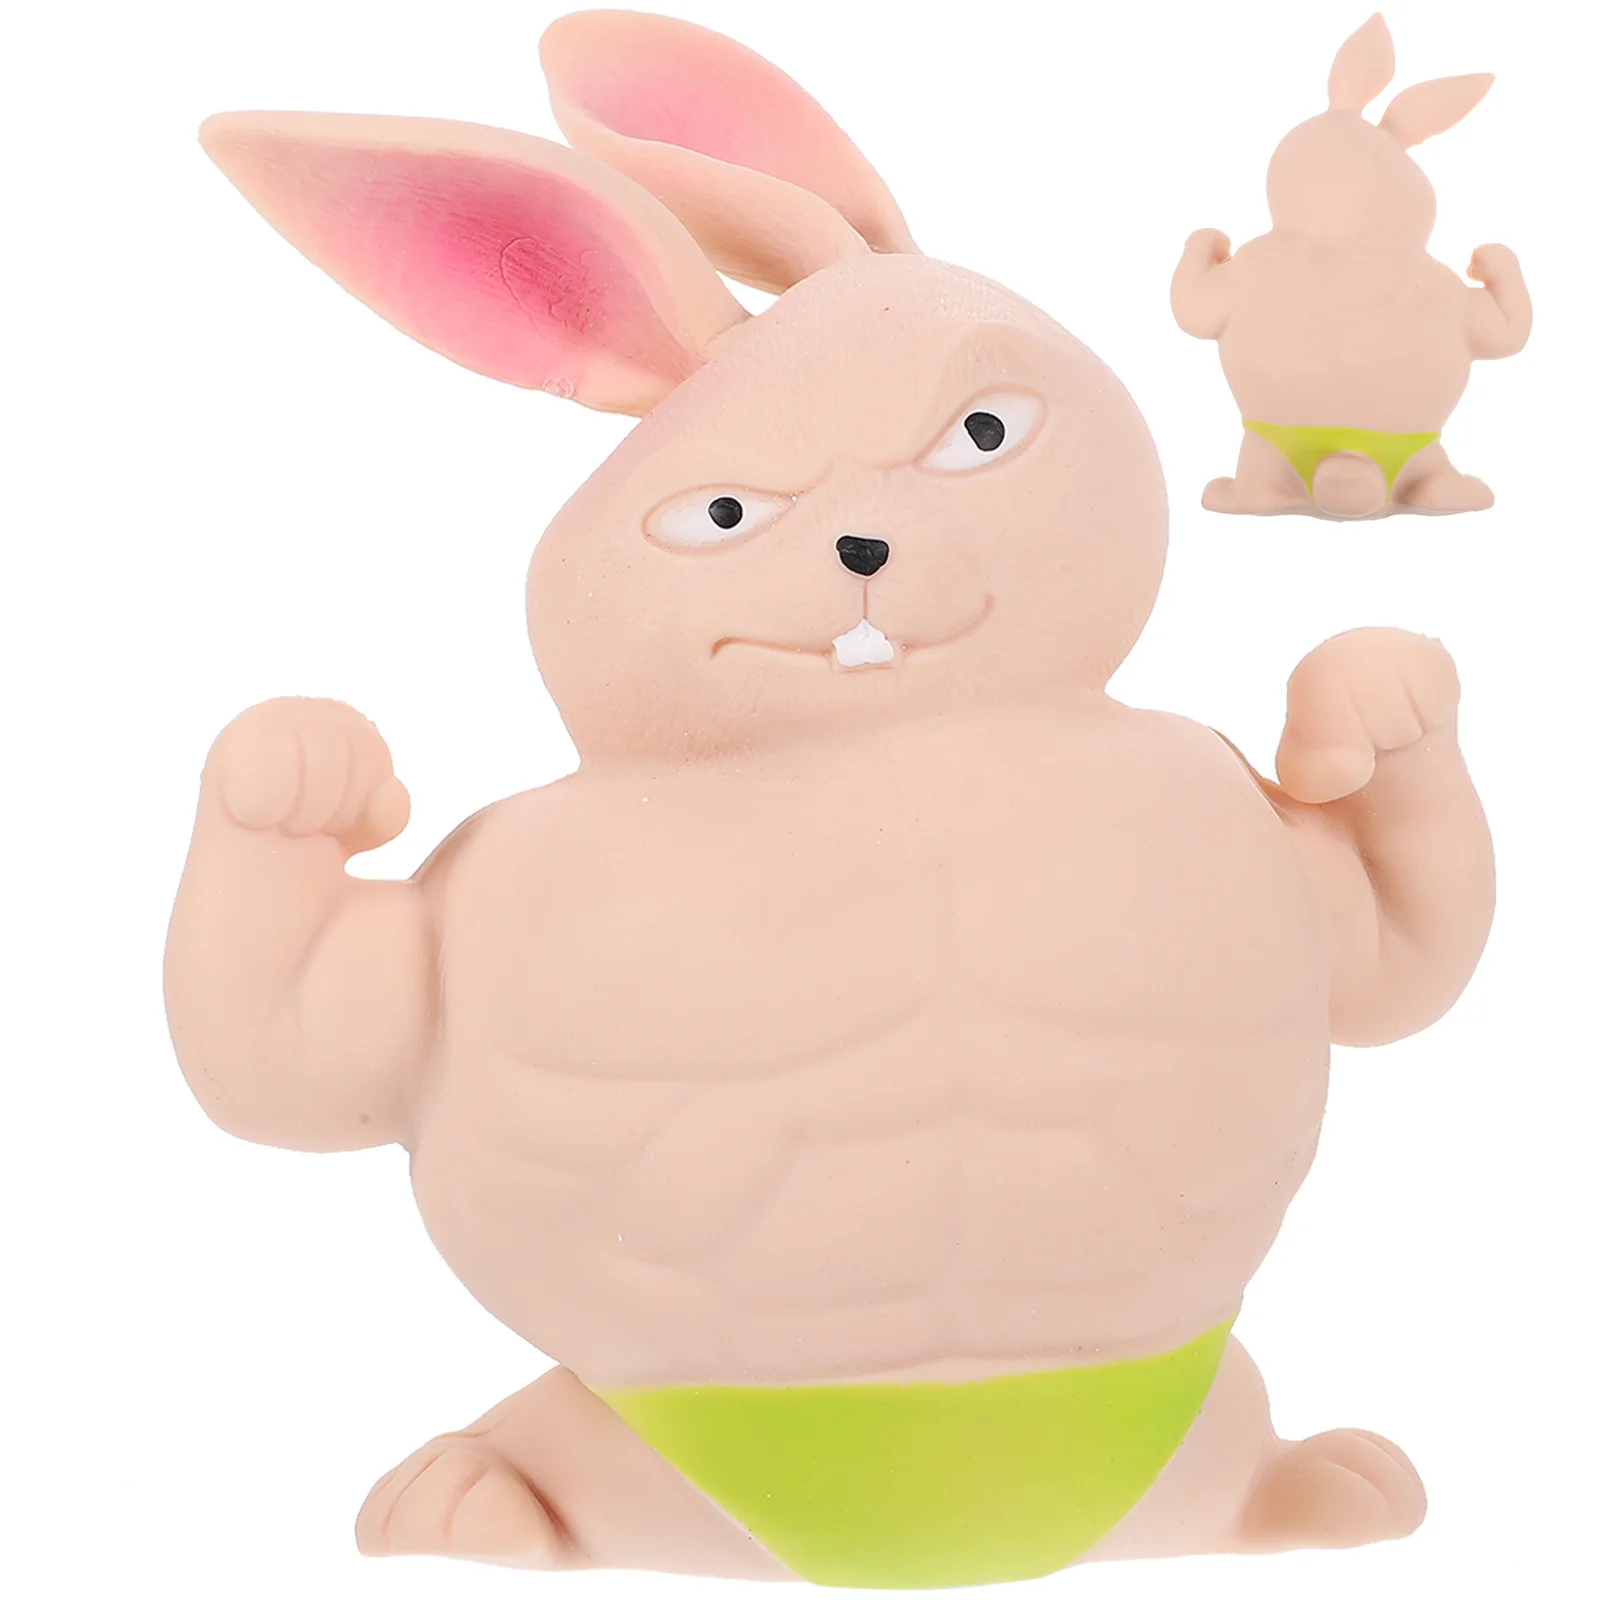 

Rabbit Squeezing Toy Animal Stretchy Toy Funny Rabbit Toy Plaything TPR Sandpack Muscle Rabbit Trick Gift Desktop Decor